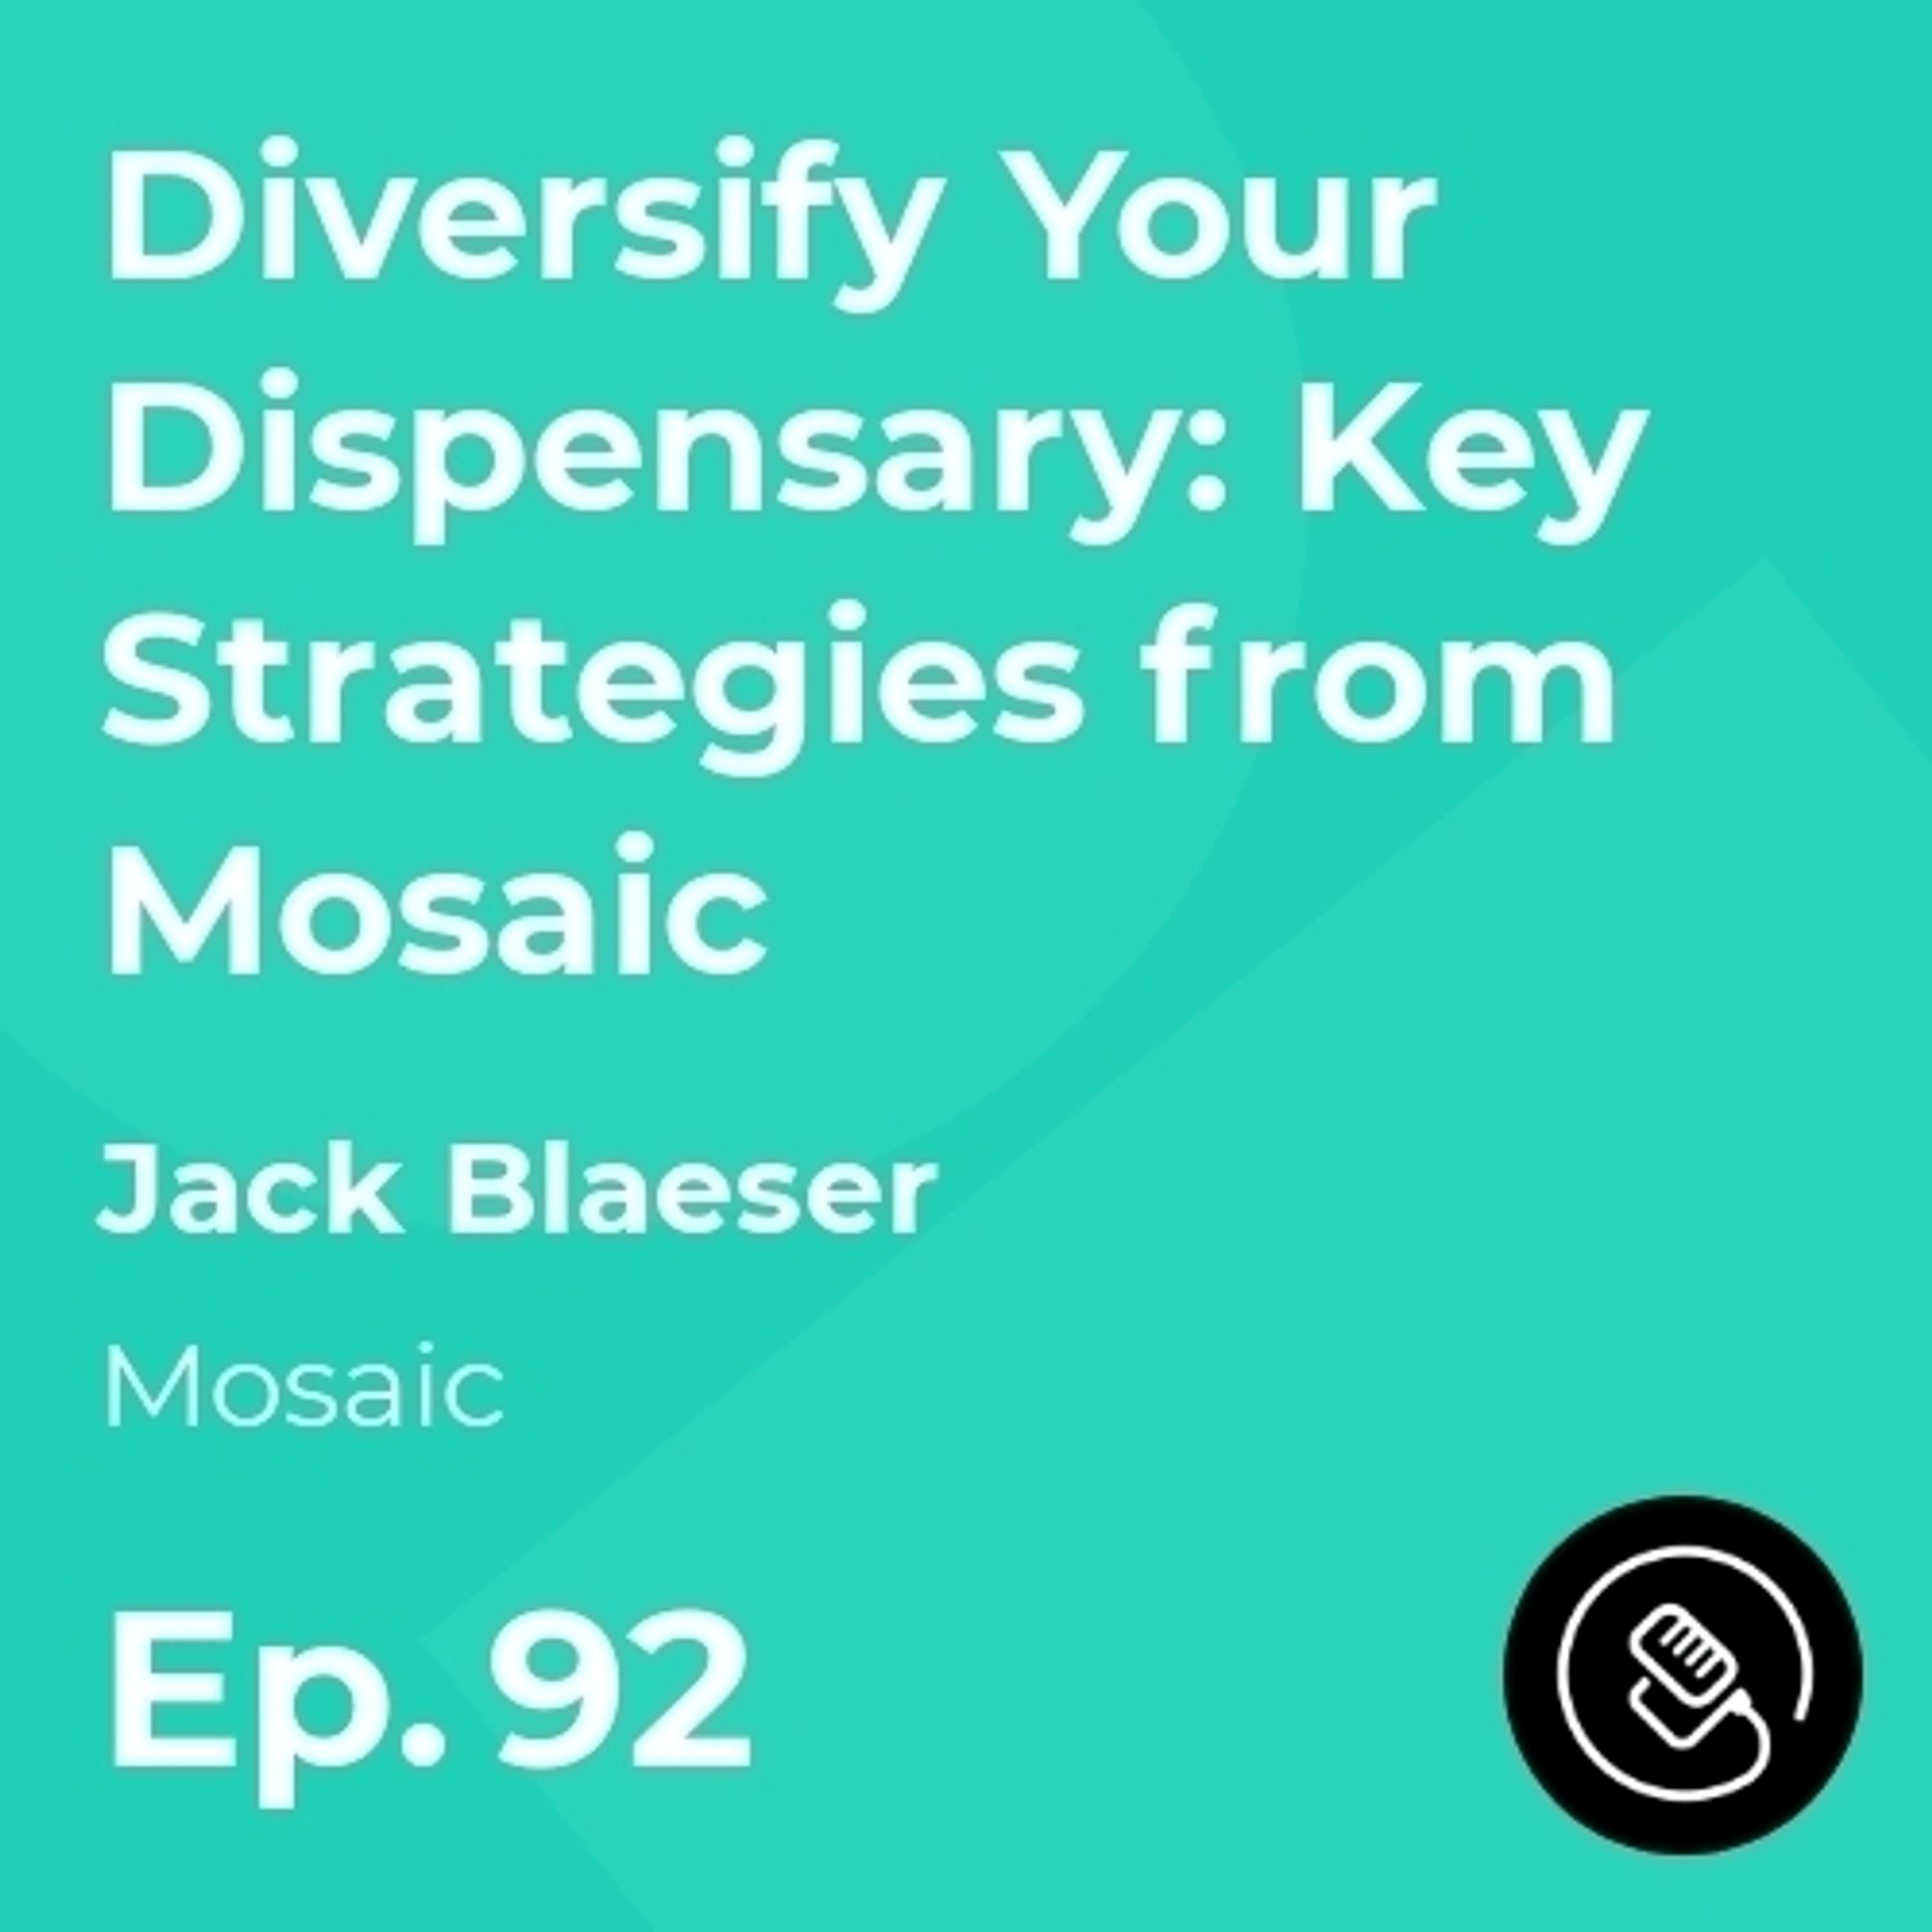 Diversify Your Dispensary: Key Strategies from Mosaic